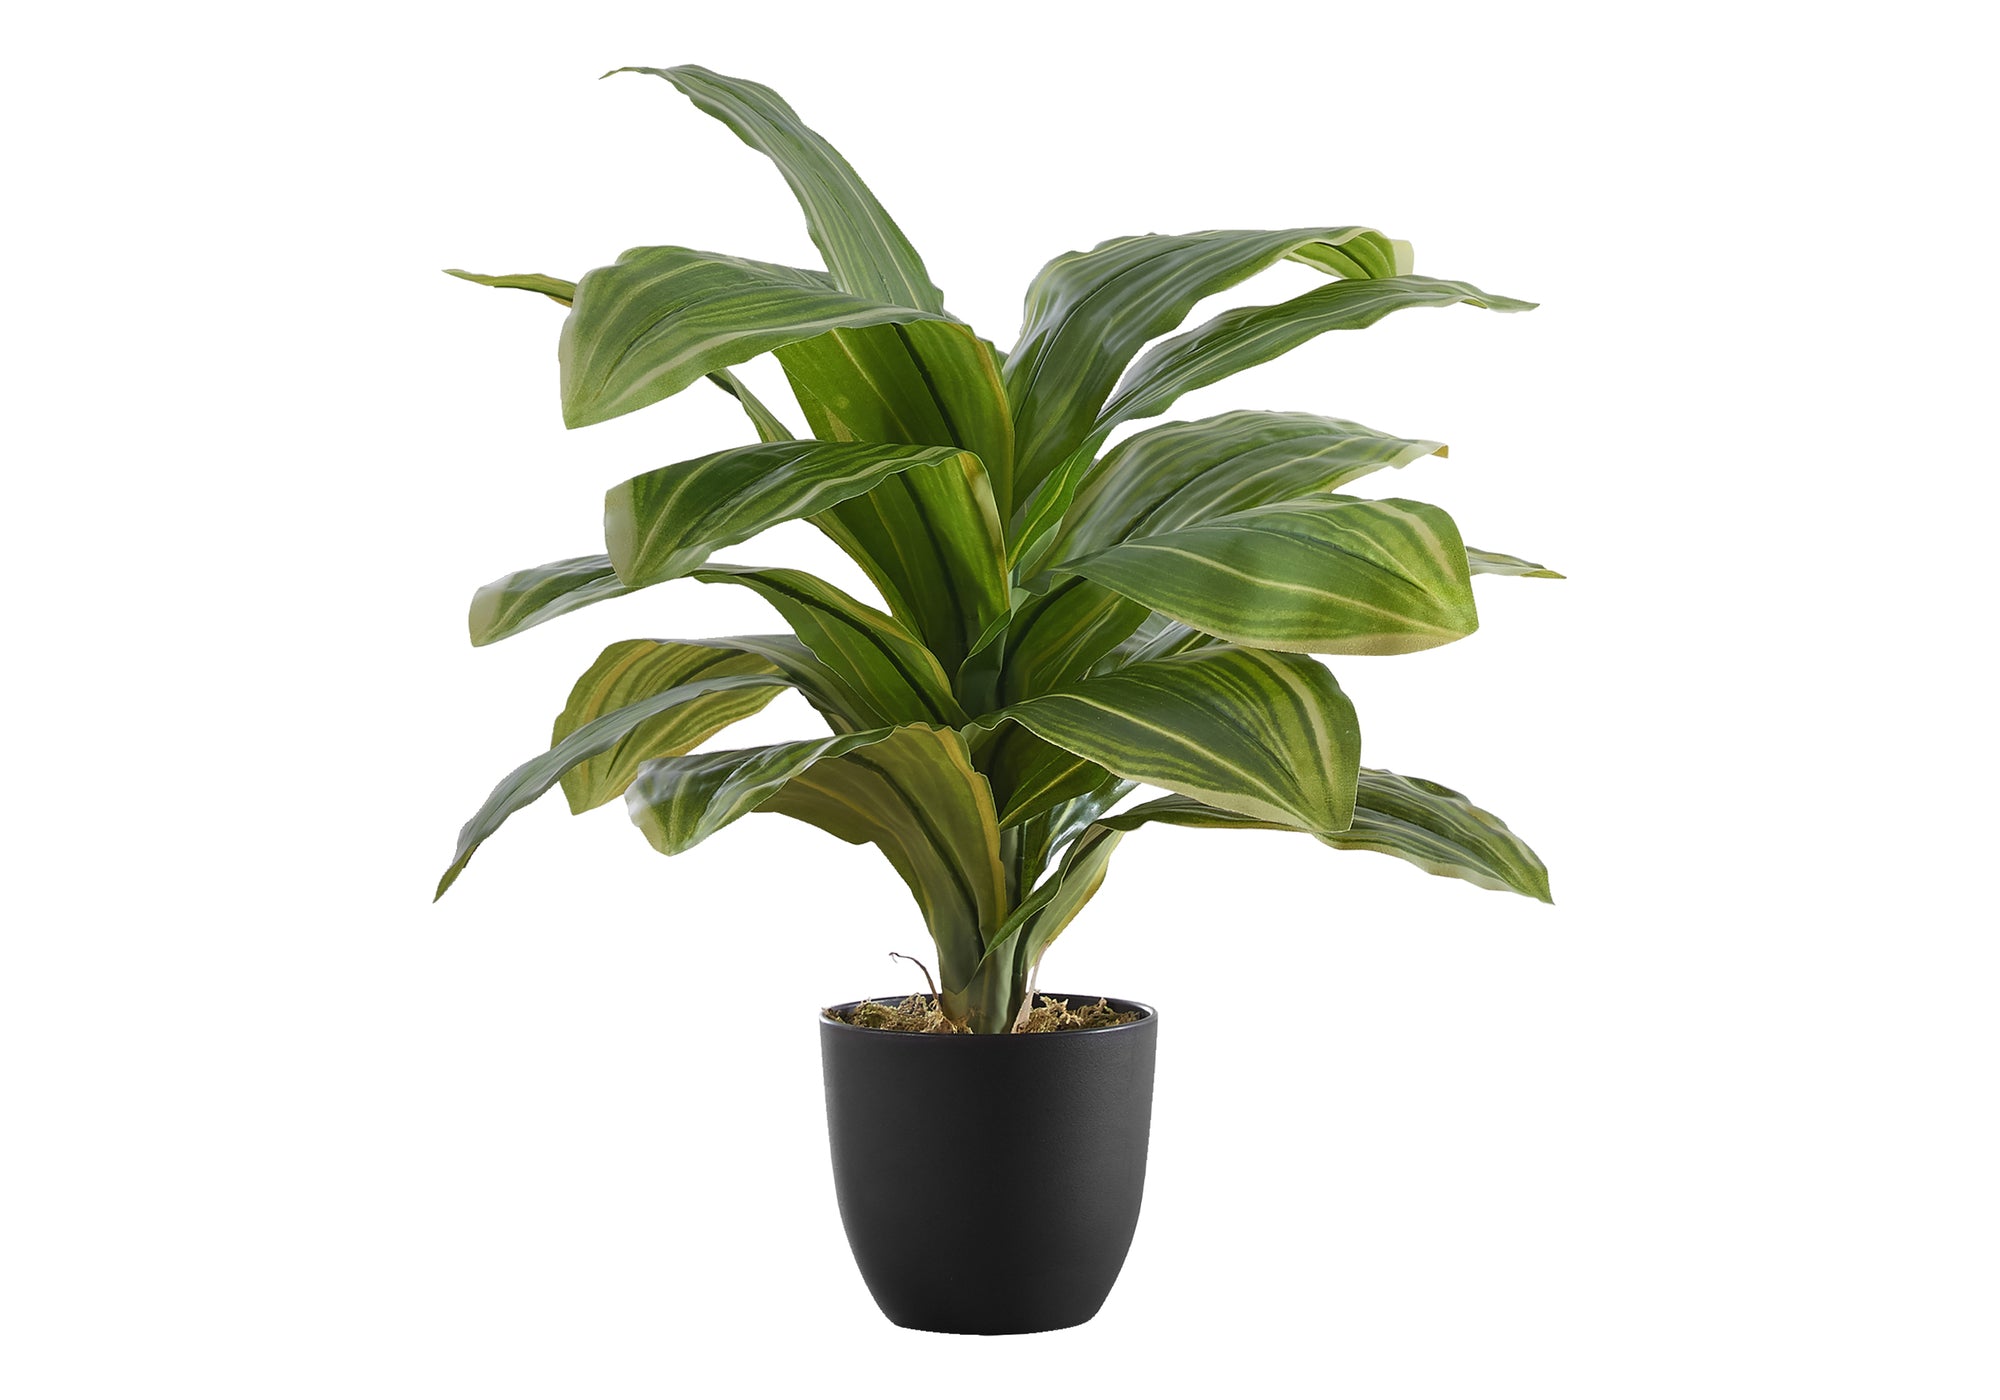 MN-649573    Artificial Plant, 17" Tall, Dracaena, Indoor, Faux, Fake, Table, Greenery, Potted, Real Touch, Decorative, Green Leaves, Black Pot